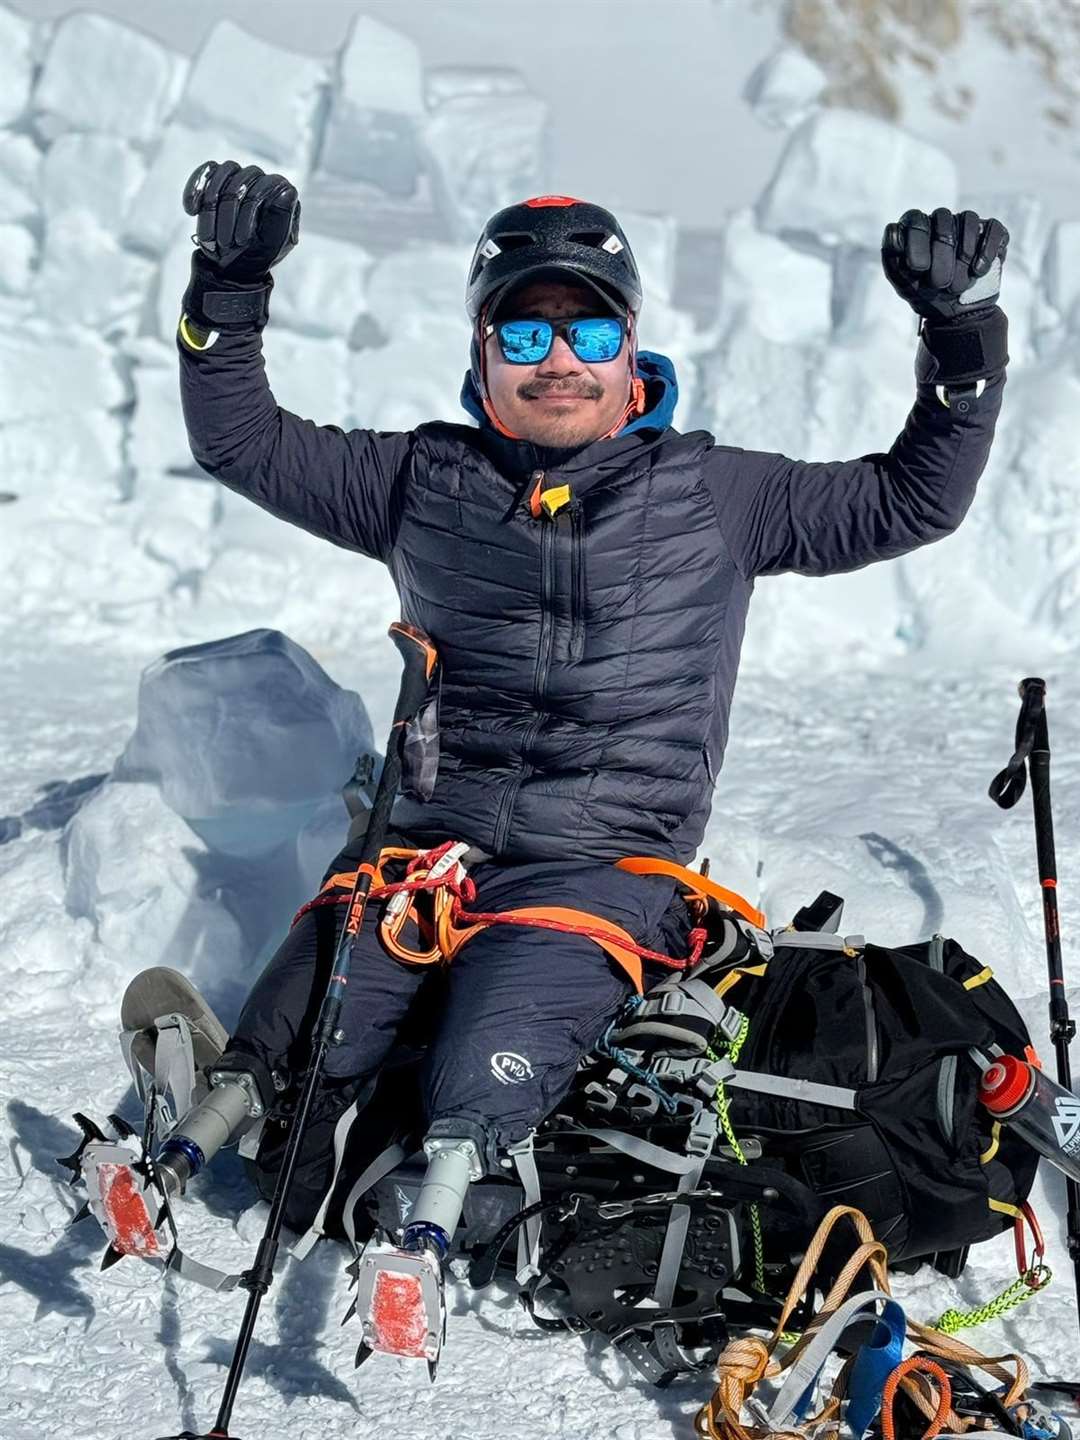 Former Gurkha soldier Hari Budha Magar spent two weeks on the ascent of Denali in Alaska before reaching the summit at 20,310ft